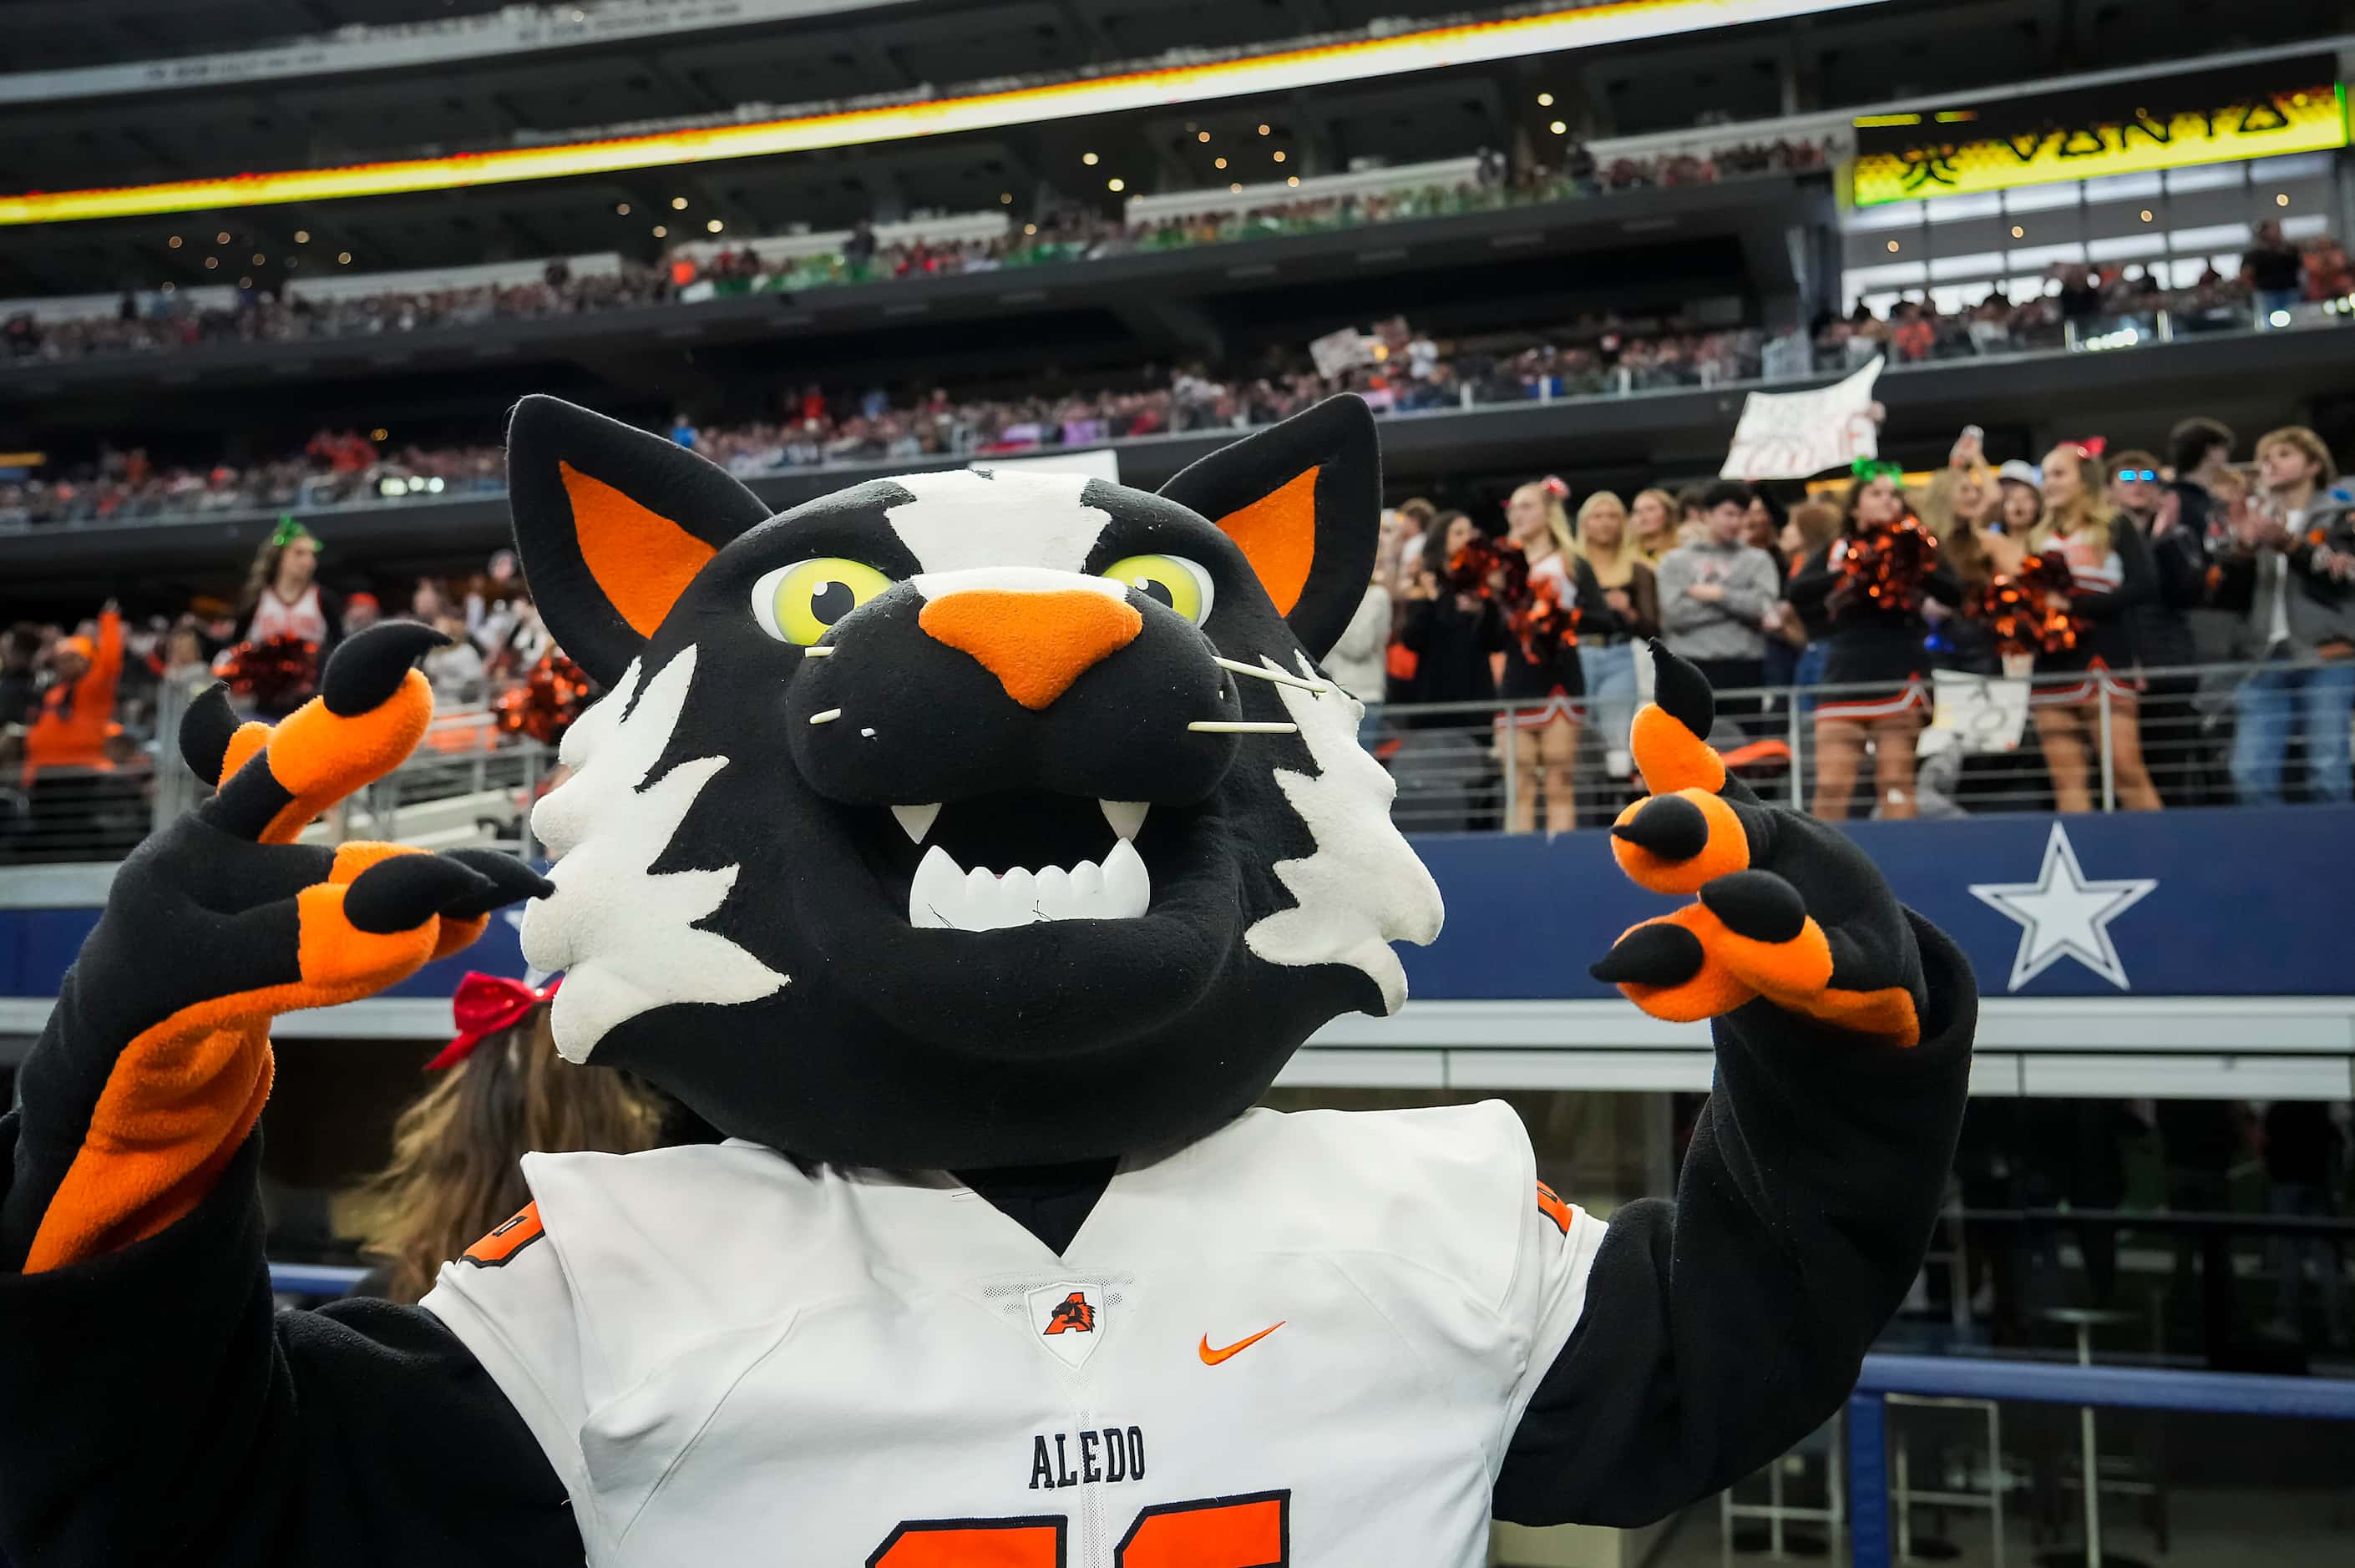 The Aledo mascot celebrates with fans during the first half of Class 5A Division I state...